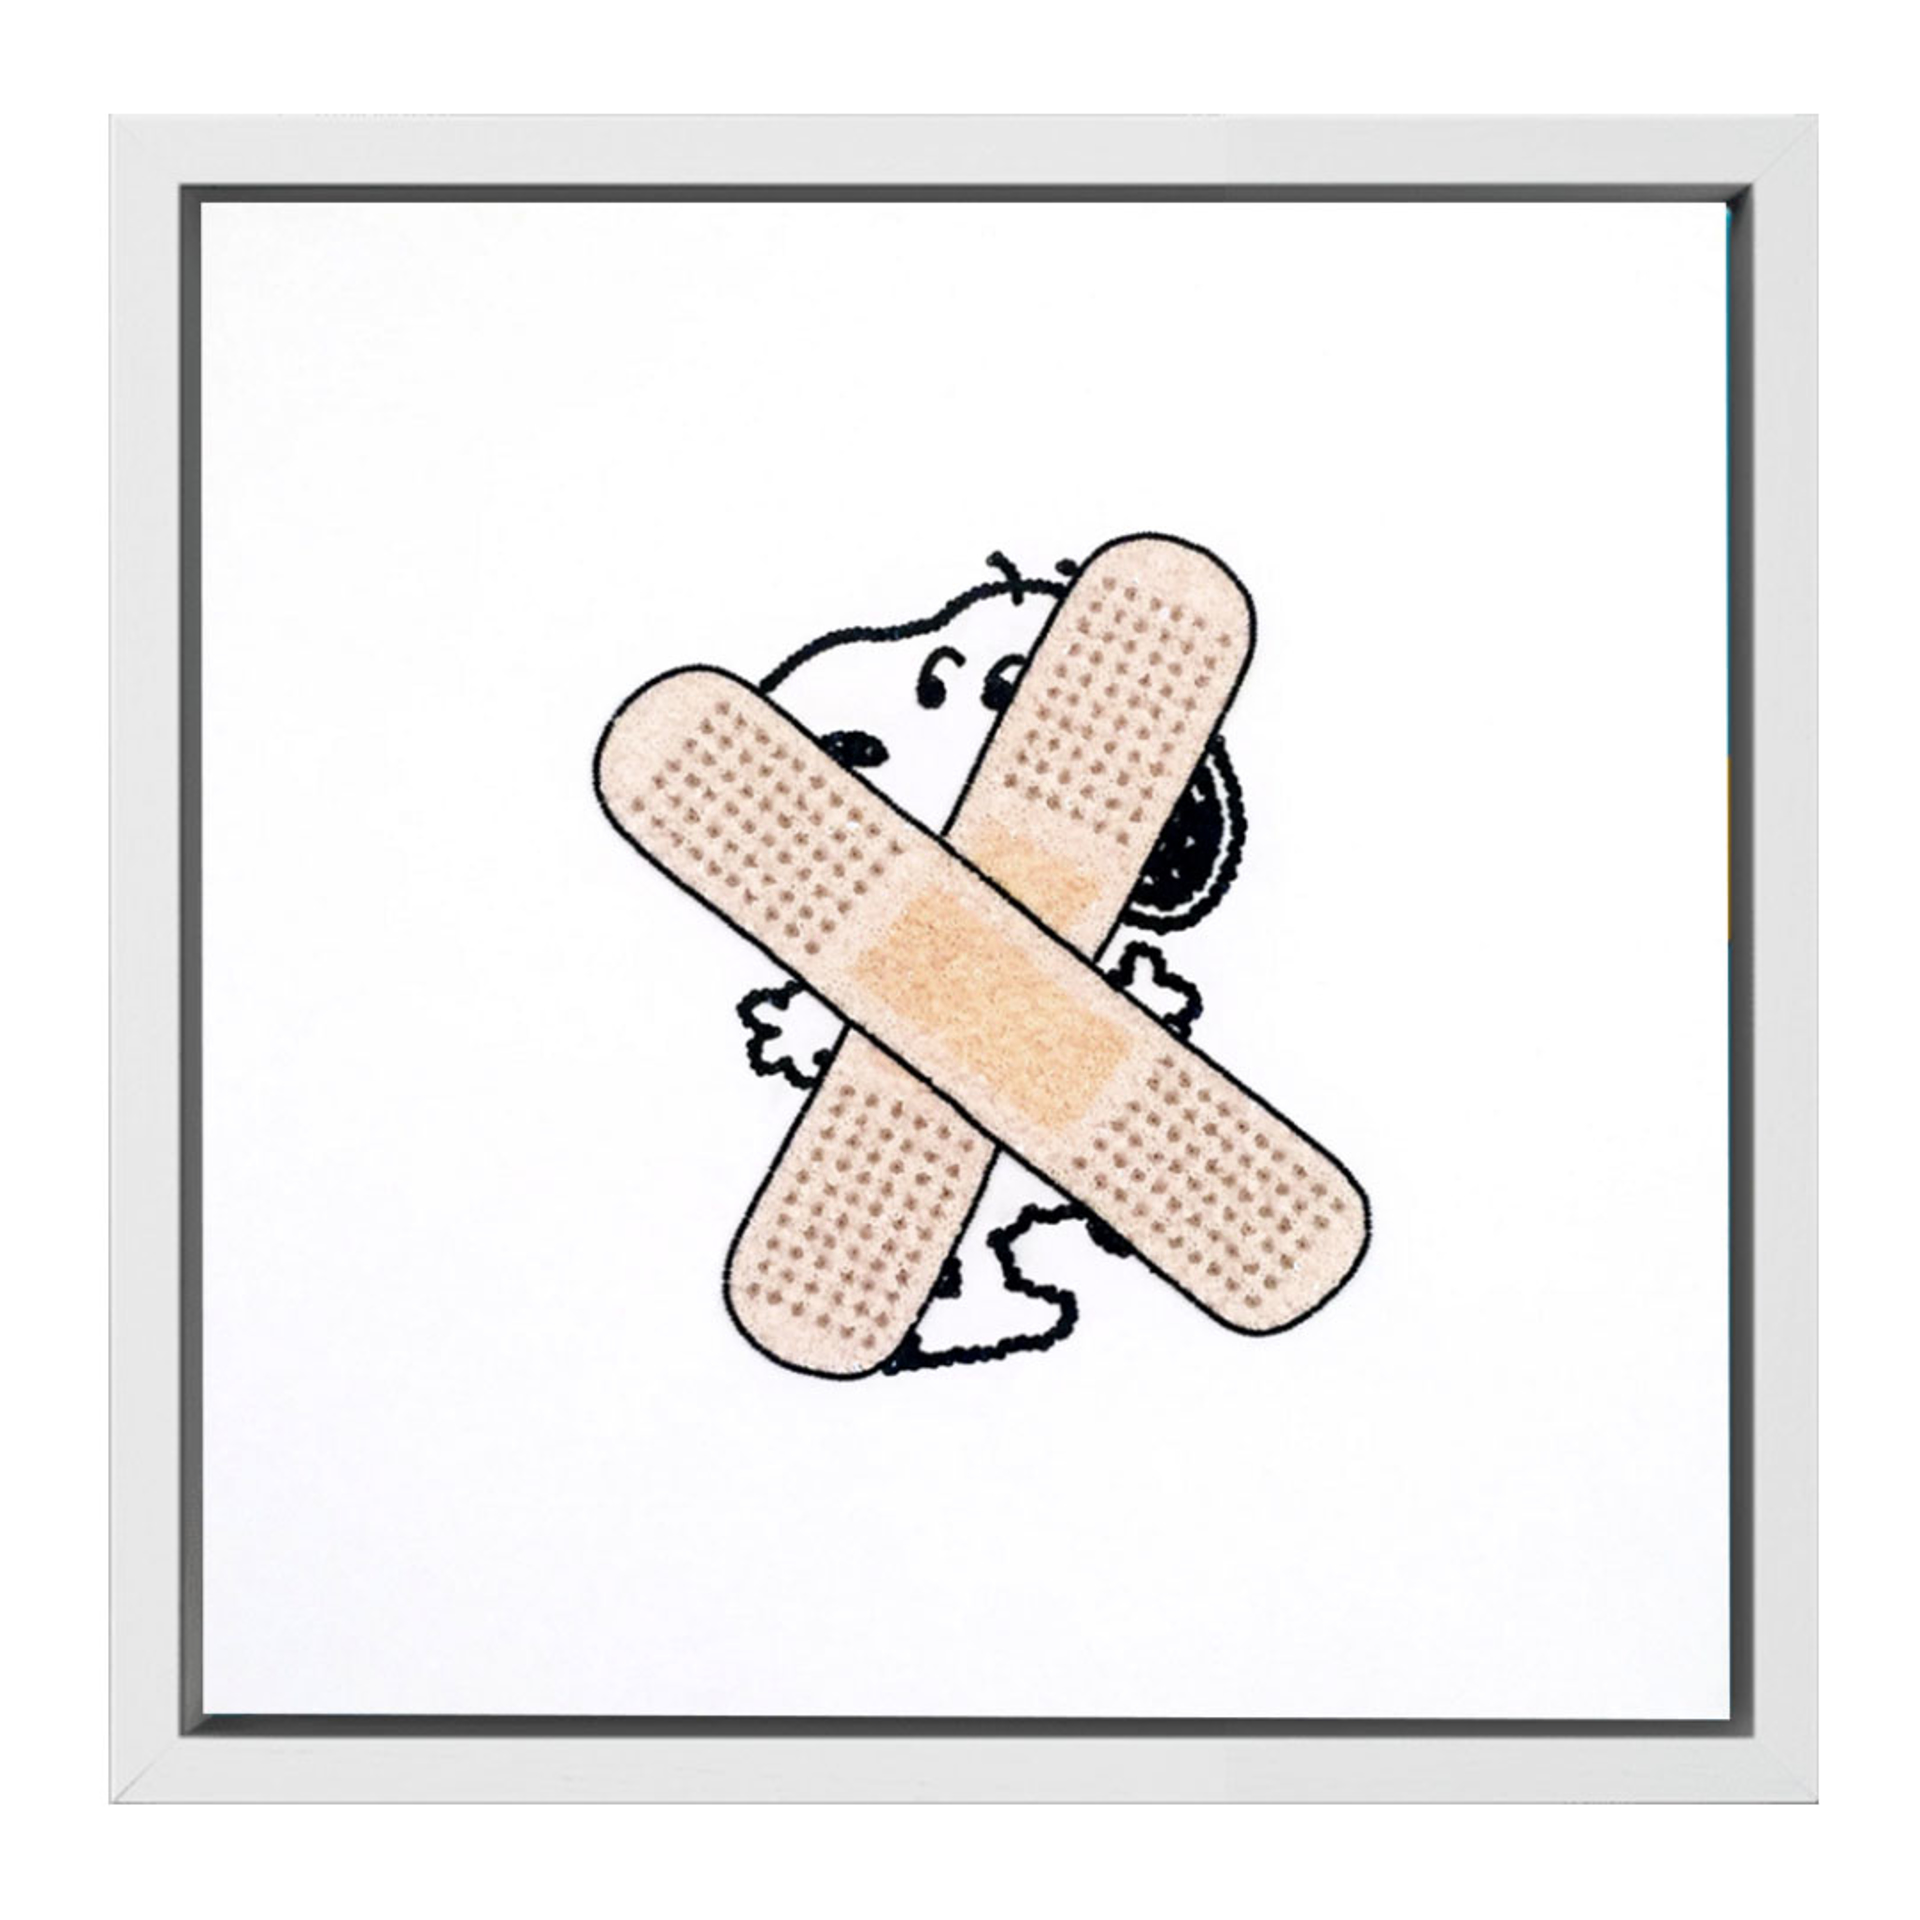 Snoopy plaster by Philip Colbert